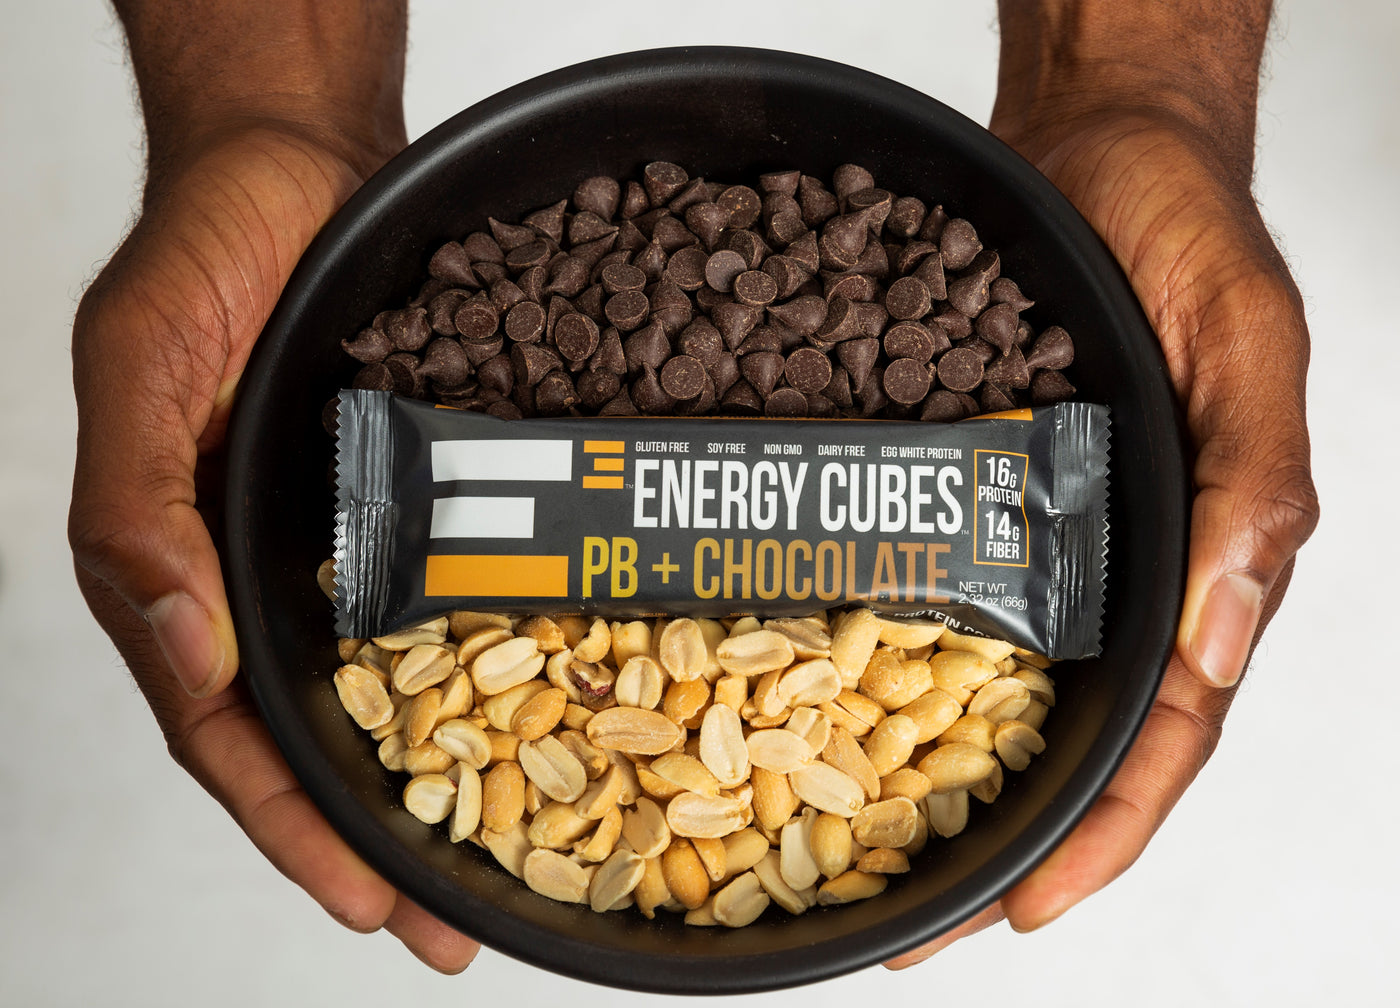 Peanut Butter and Dairy Free chocolate chips.  Fair trade chocolate.  Gluten free, dairy free, soy free, all natural and non-gmo.  The beautiful flavors of peanuts, peanut butter, and just the right aount of cacao.  Enjoy E3 Energy Cubes